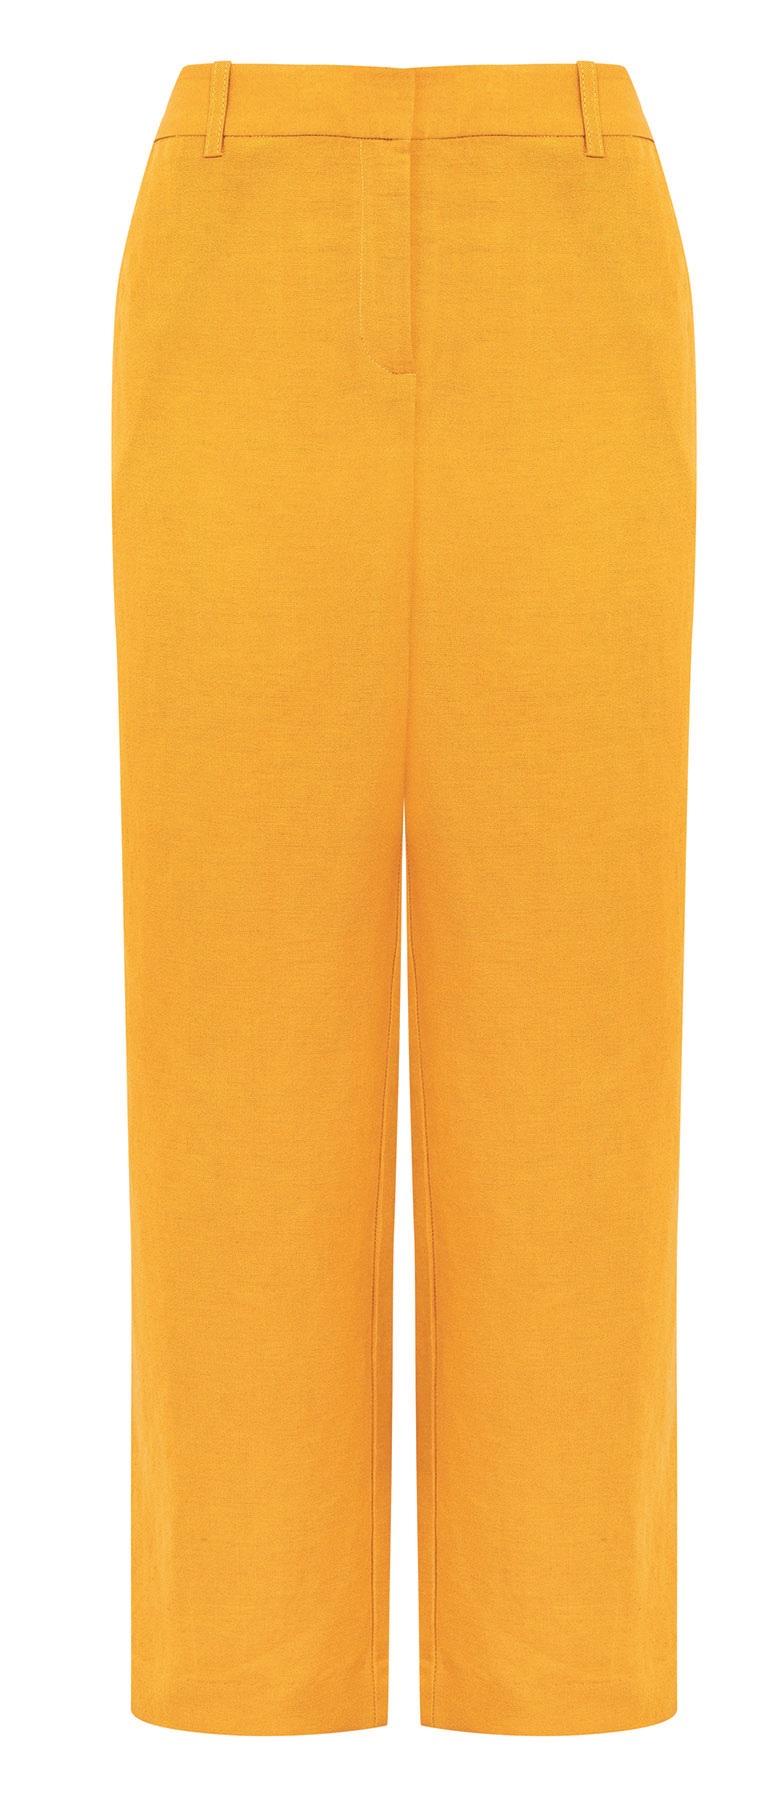 Marks and Spencer, Twiggy Woven Trouser, £35